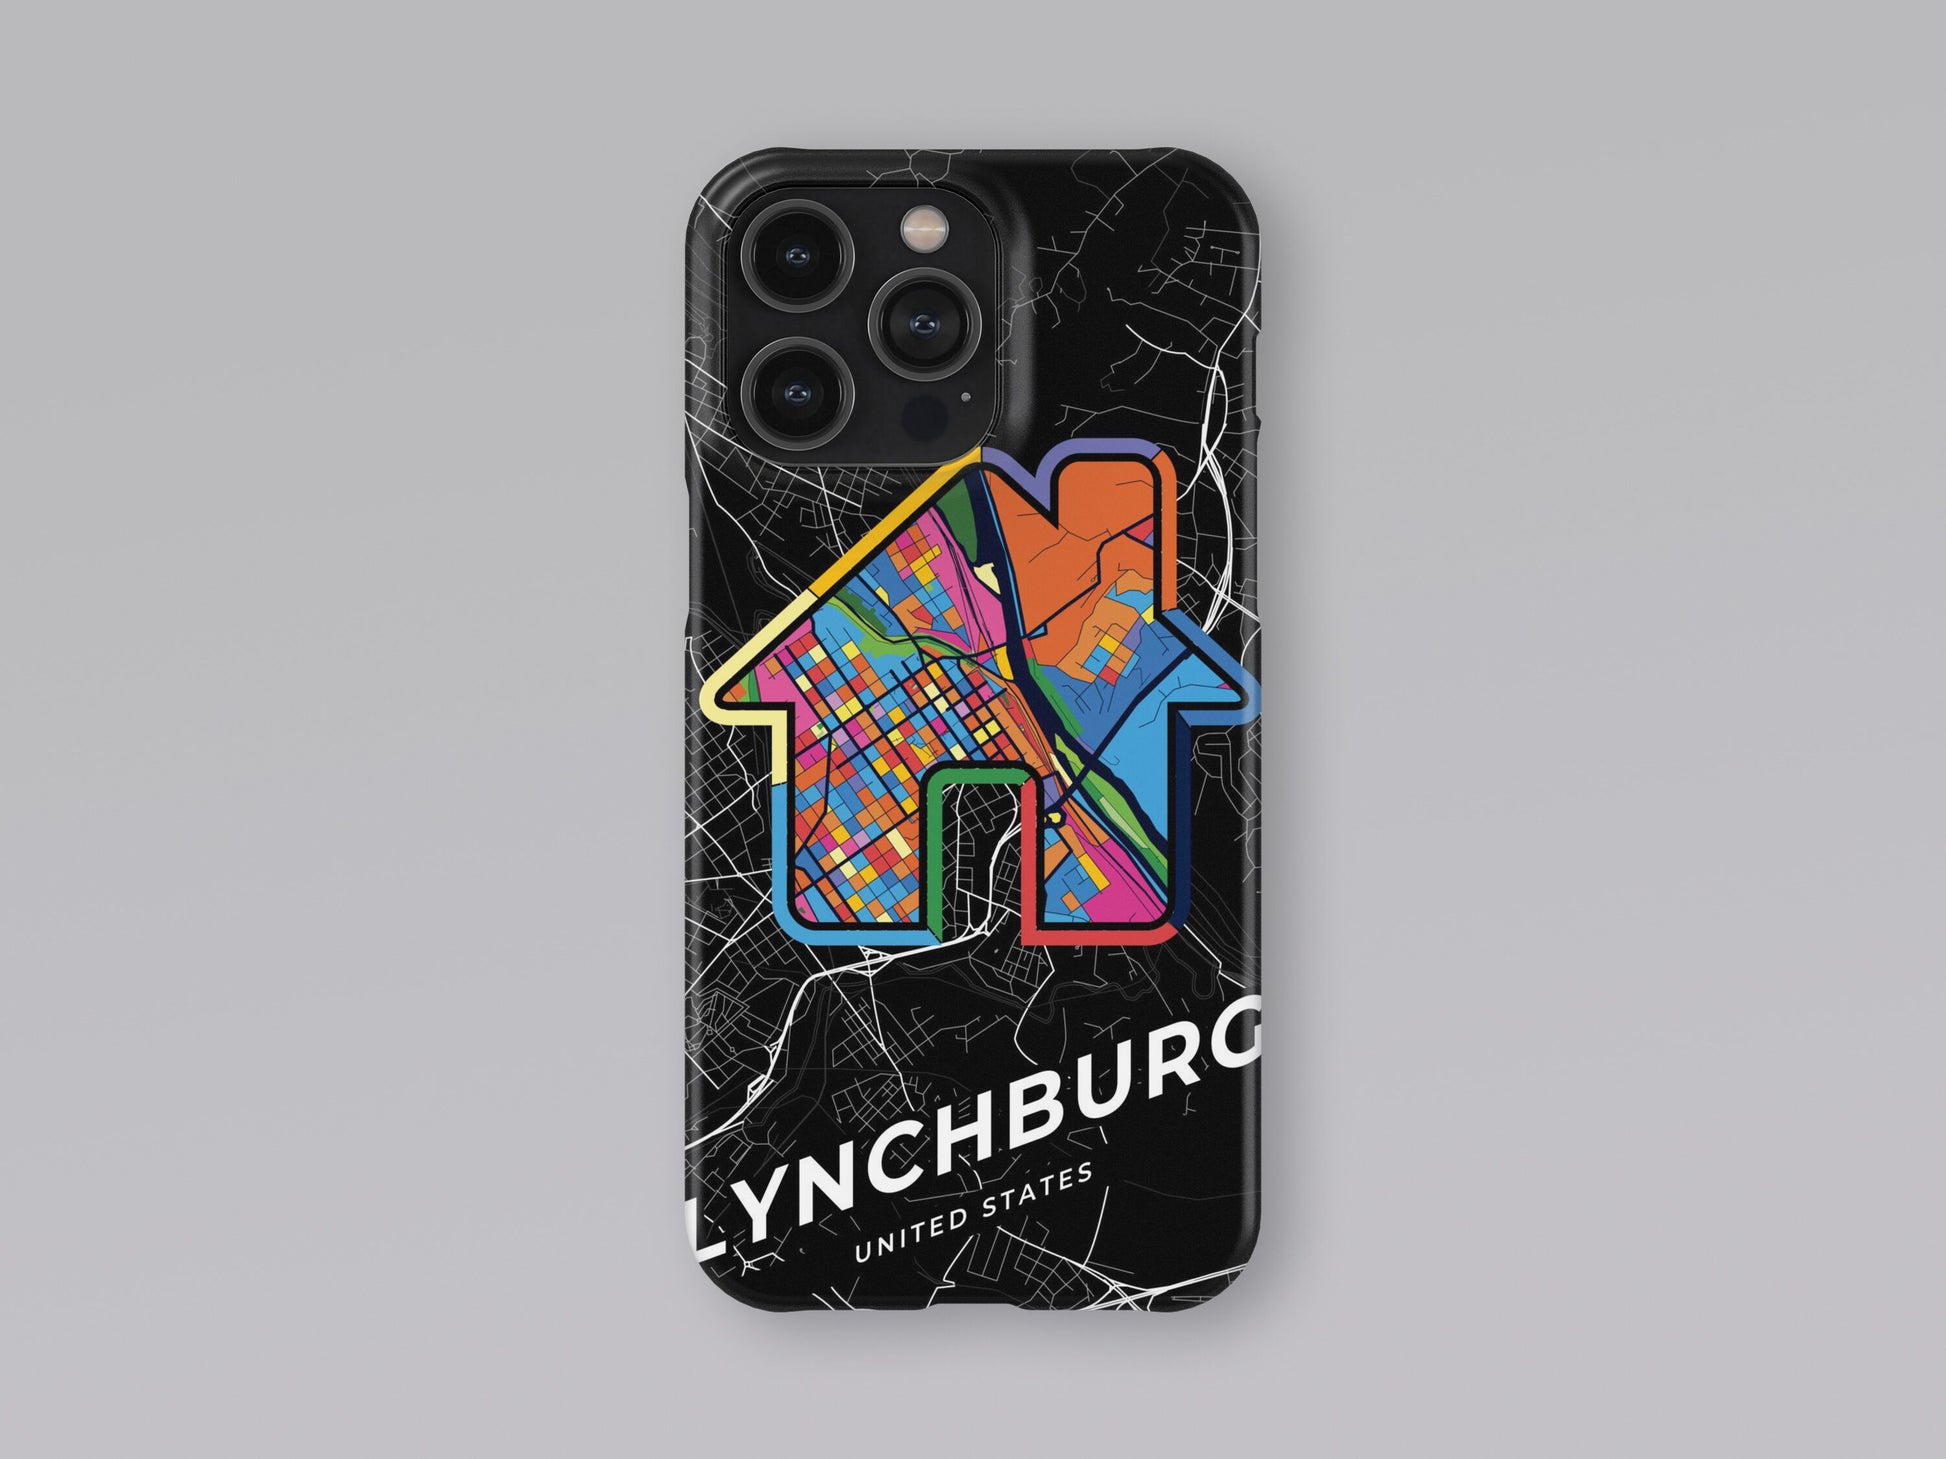 Lynchburg Virginia slim phone case with colorful icon. Birthday, wedding or housewarming gift. Couple match cases. 3